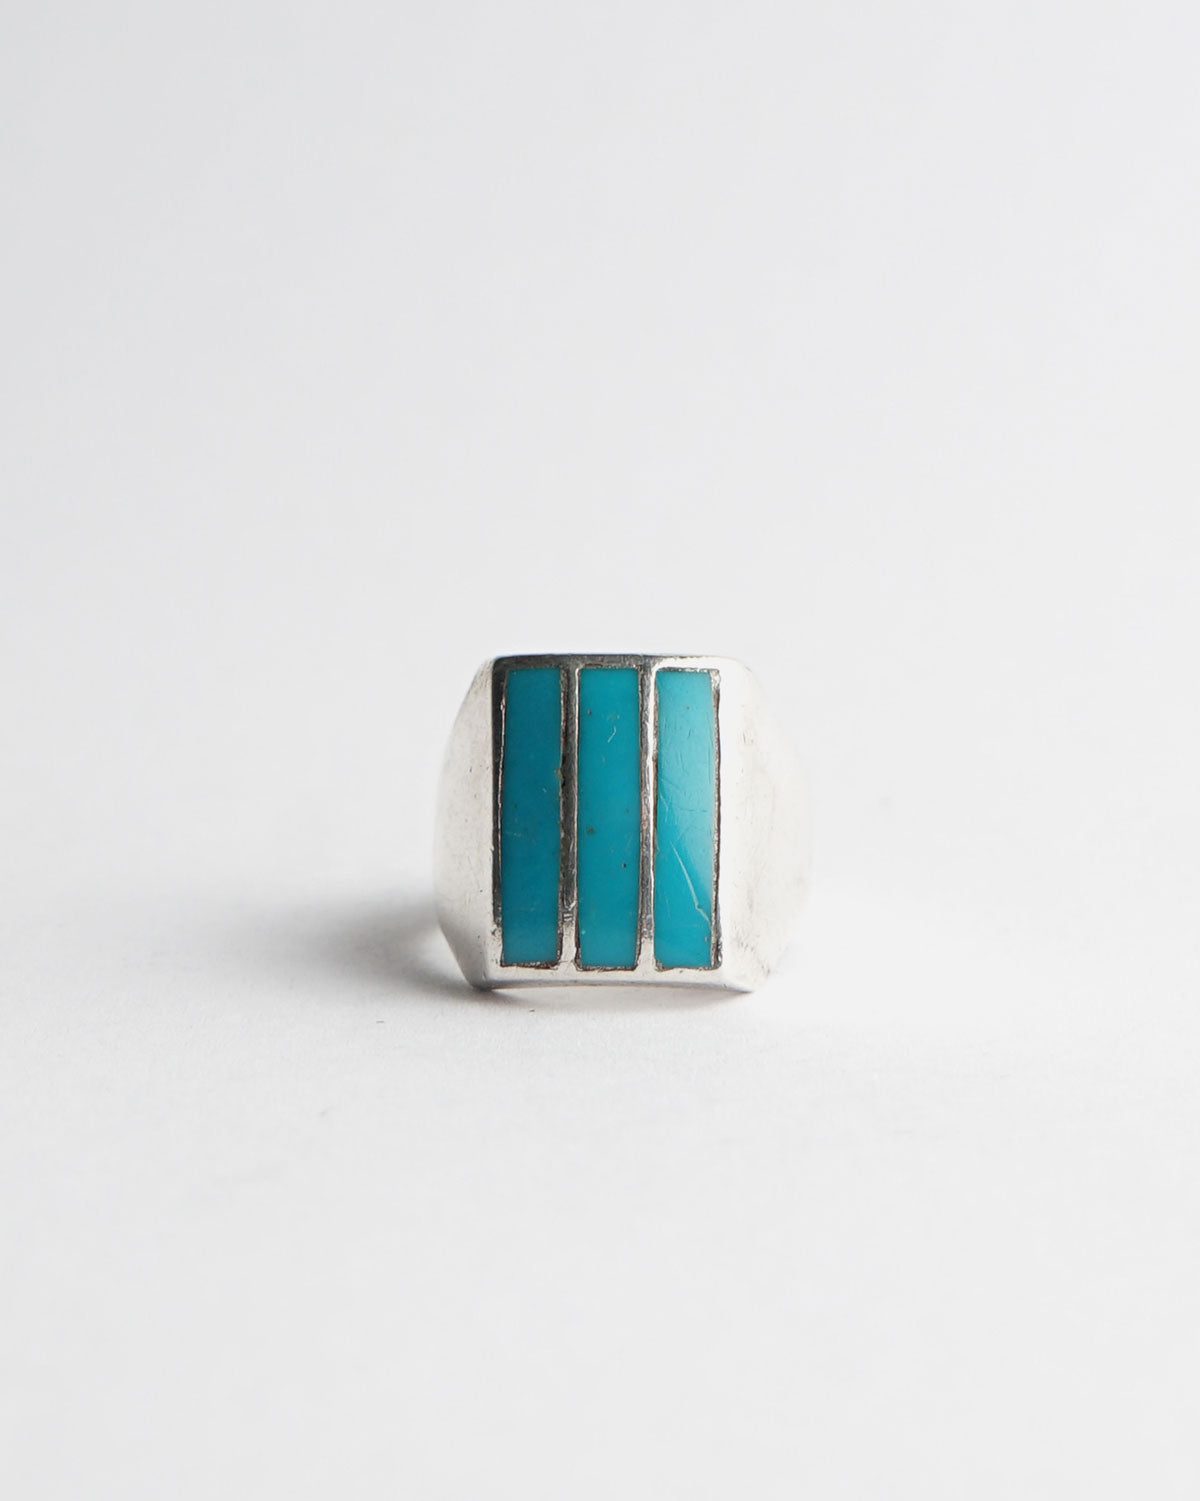 Silver x Turquoise Ring / size: 11